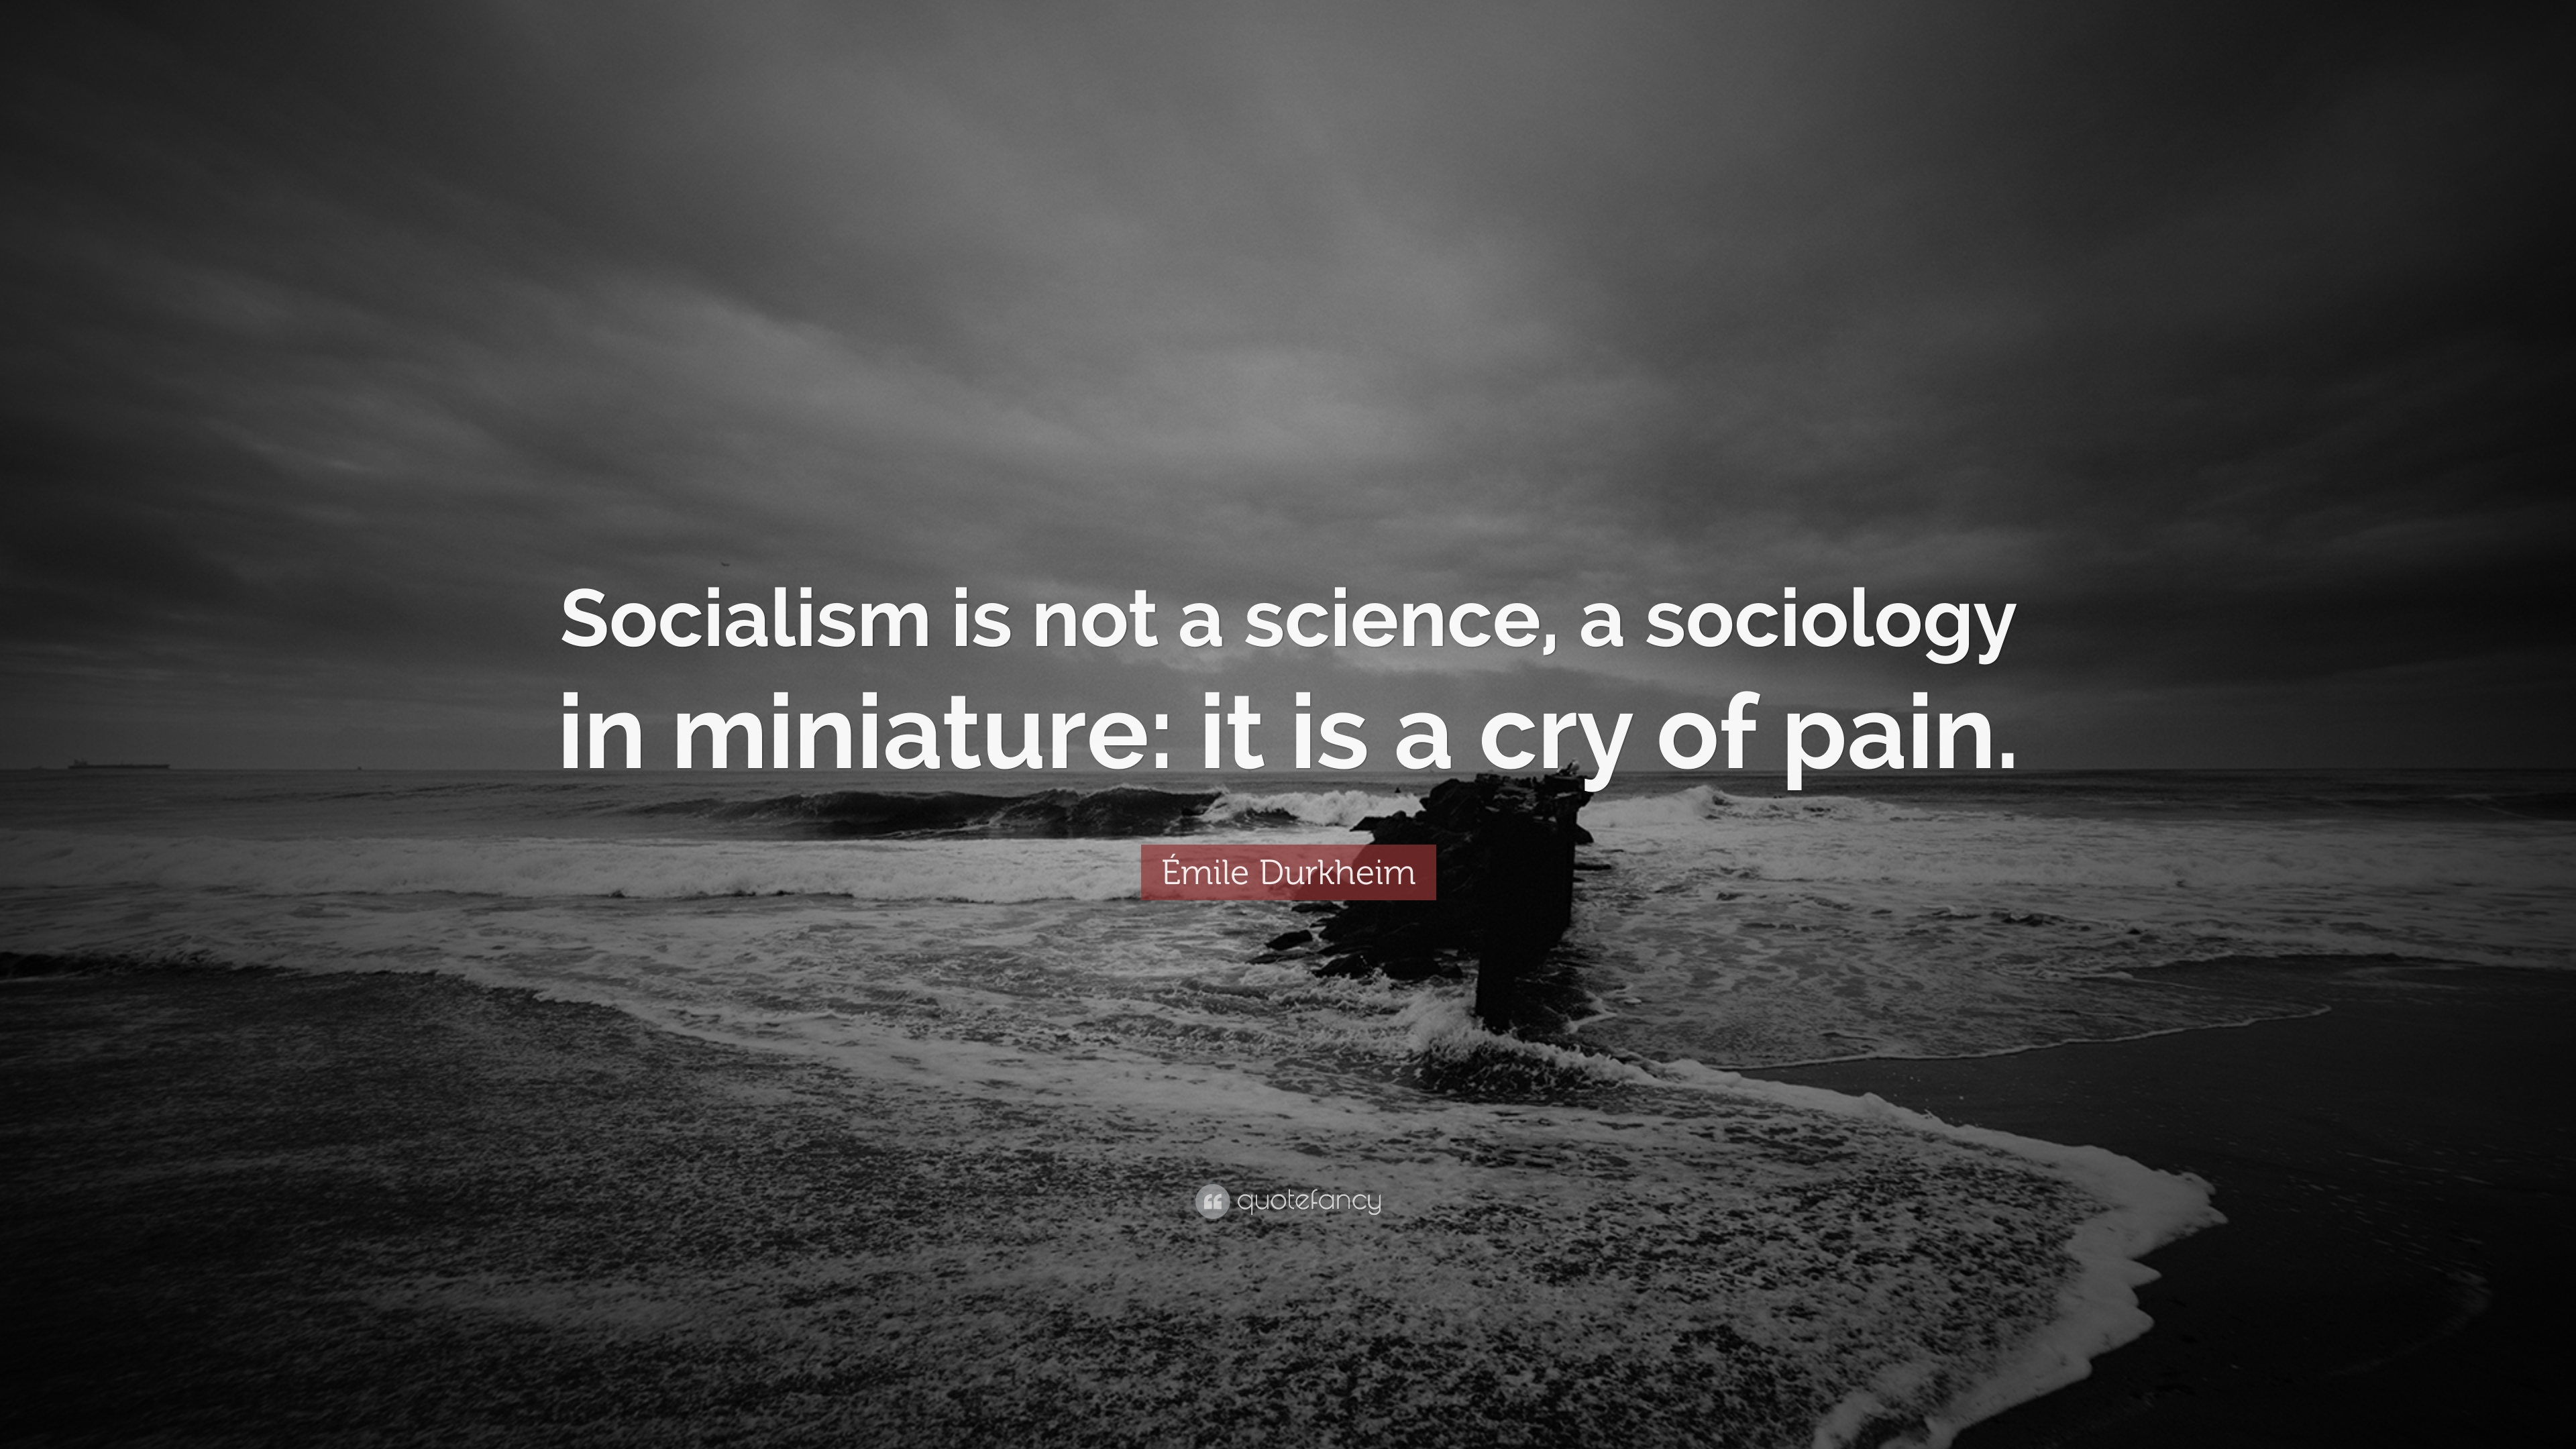 Ãmile durkheim quote âsocialism is not a science a sociology in miniature it is a cry